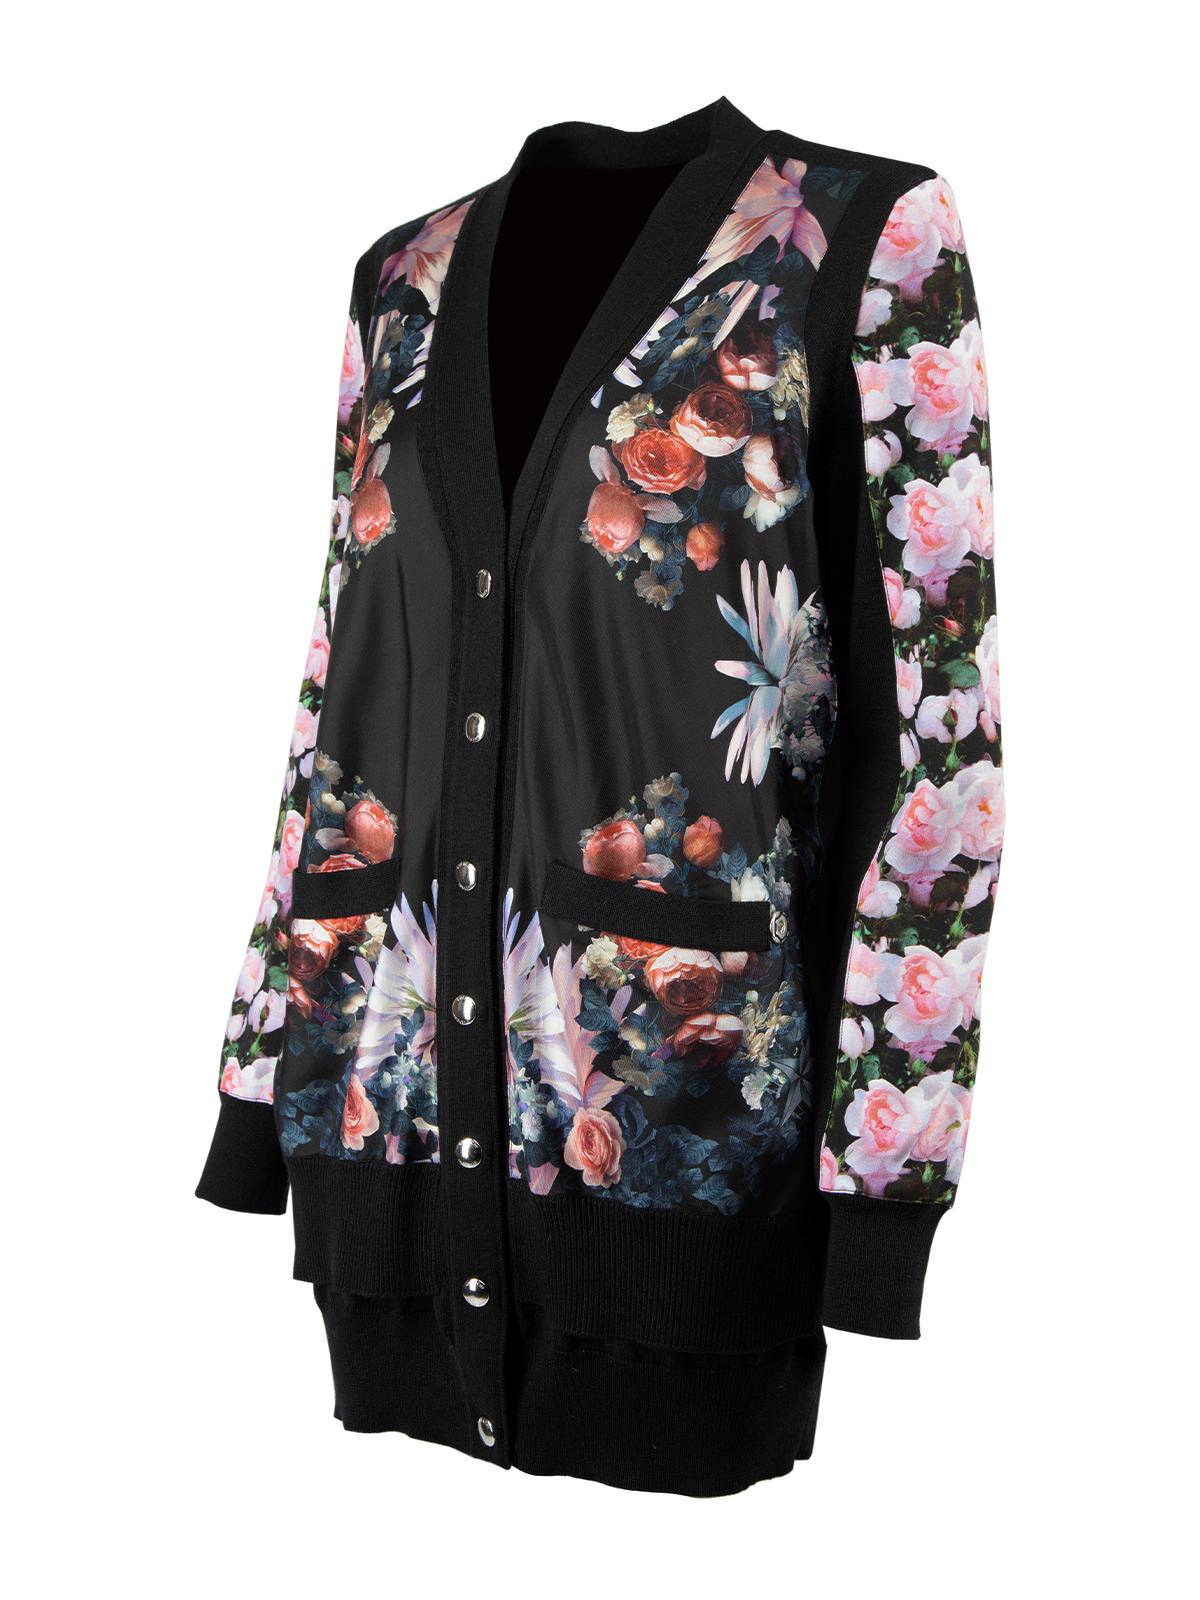 Pre-Loved Givenchy Women's Floral Longline Cardigan 1